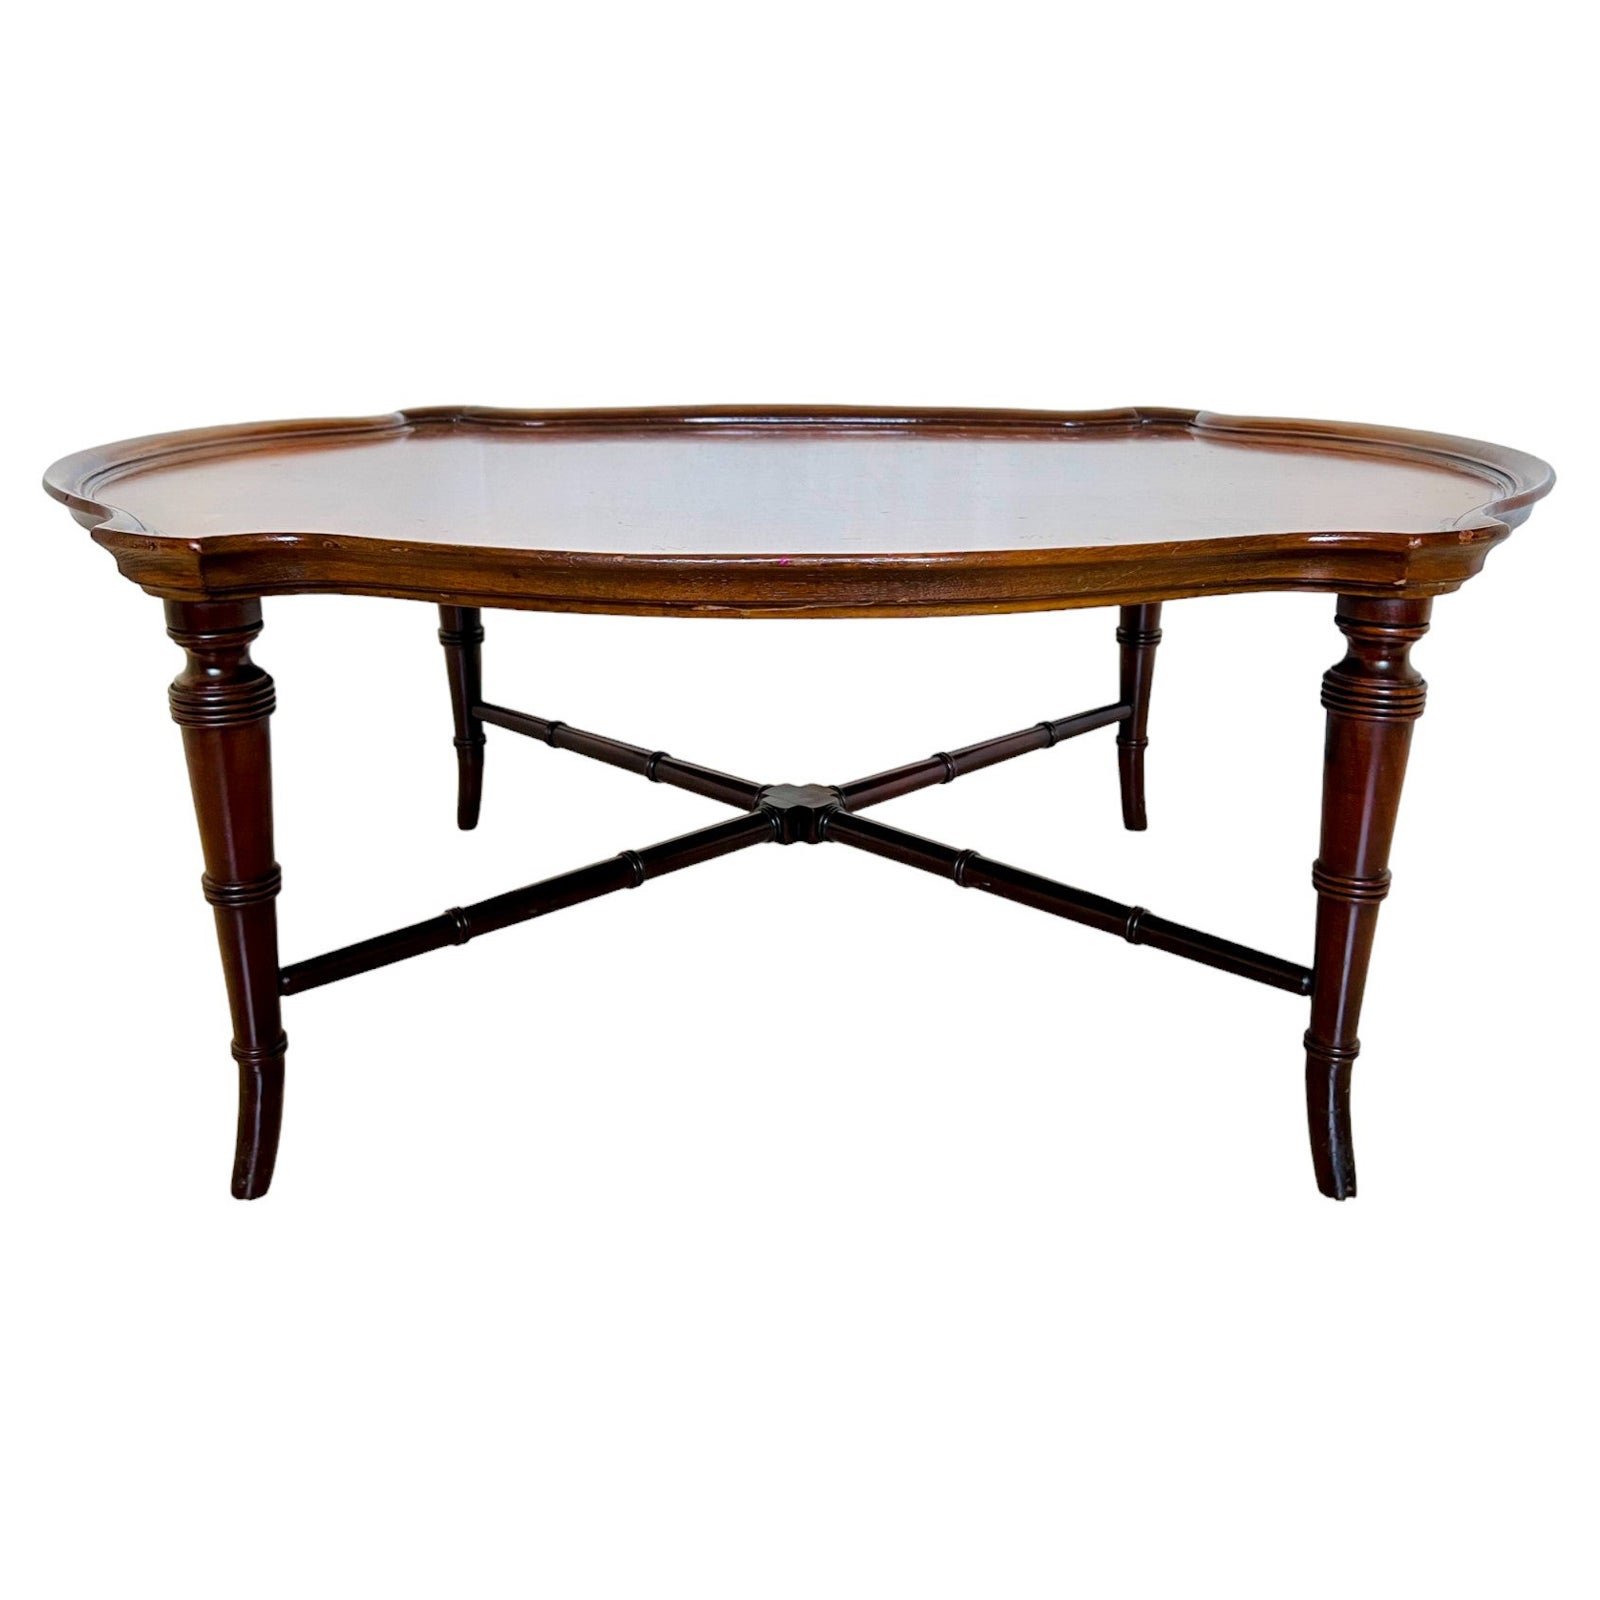 Vintage Hekman Chinoiserie Burl Top Faux Bamboo Oval Coffee Table